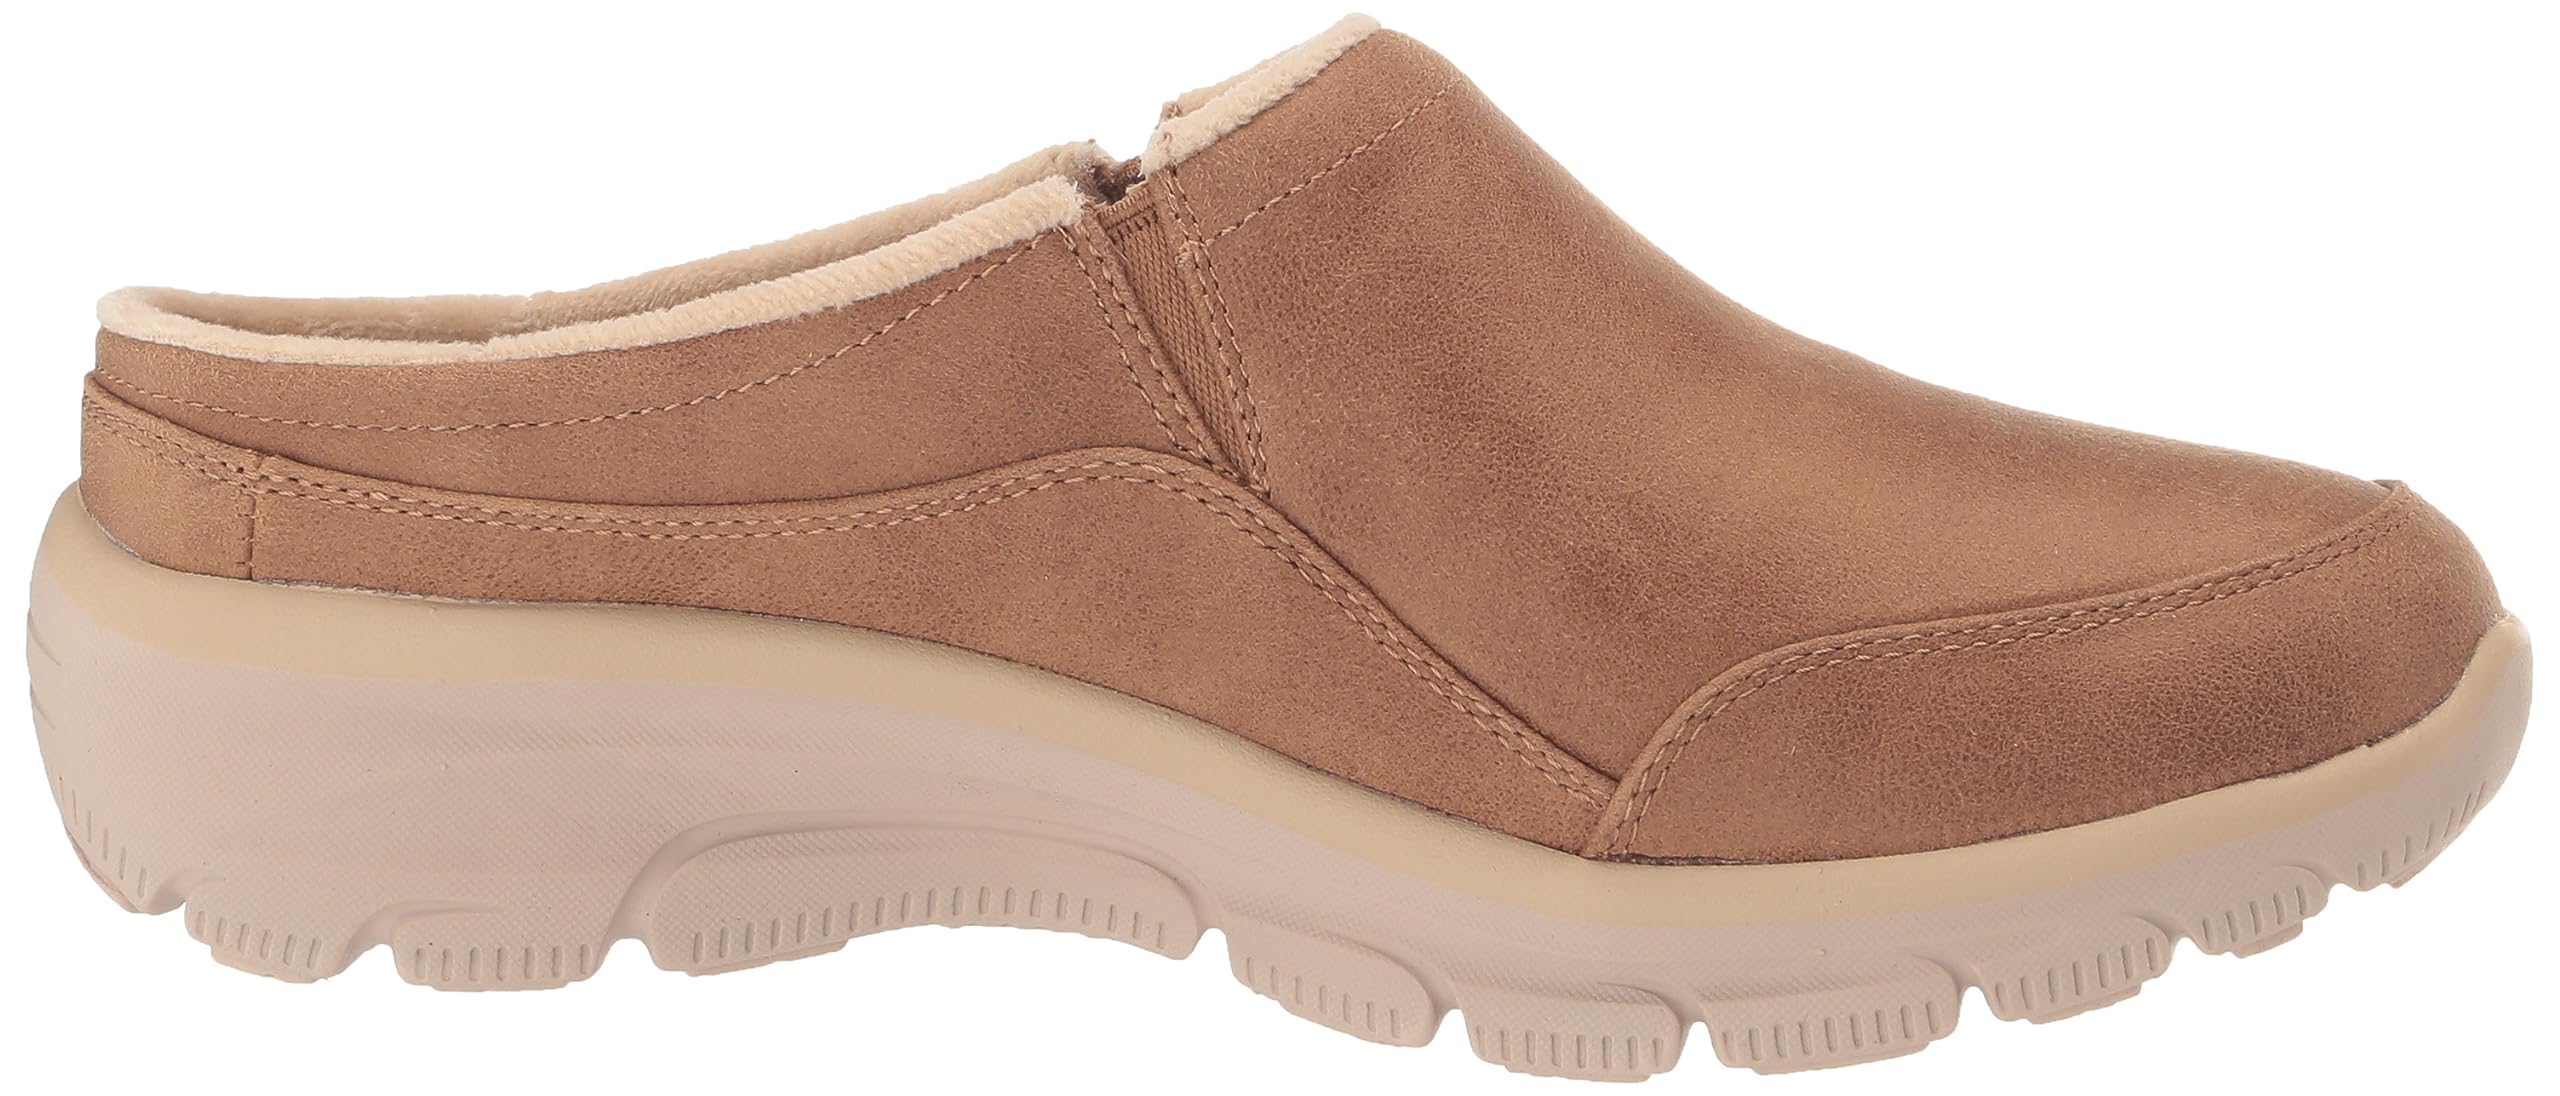 Skechers Women's, Relaxed Fit: Easy Going - Latte 2 Clog